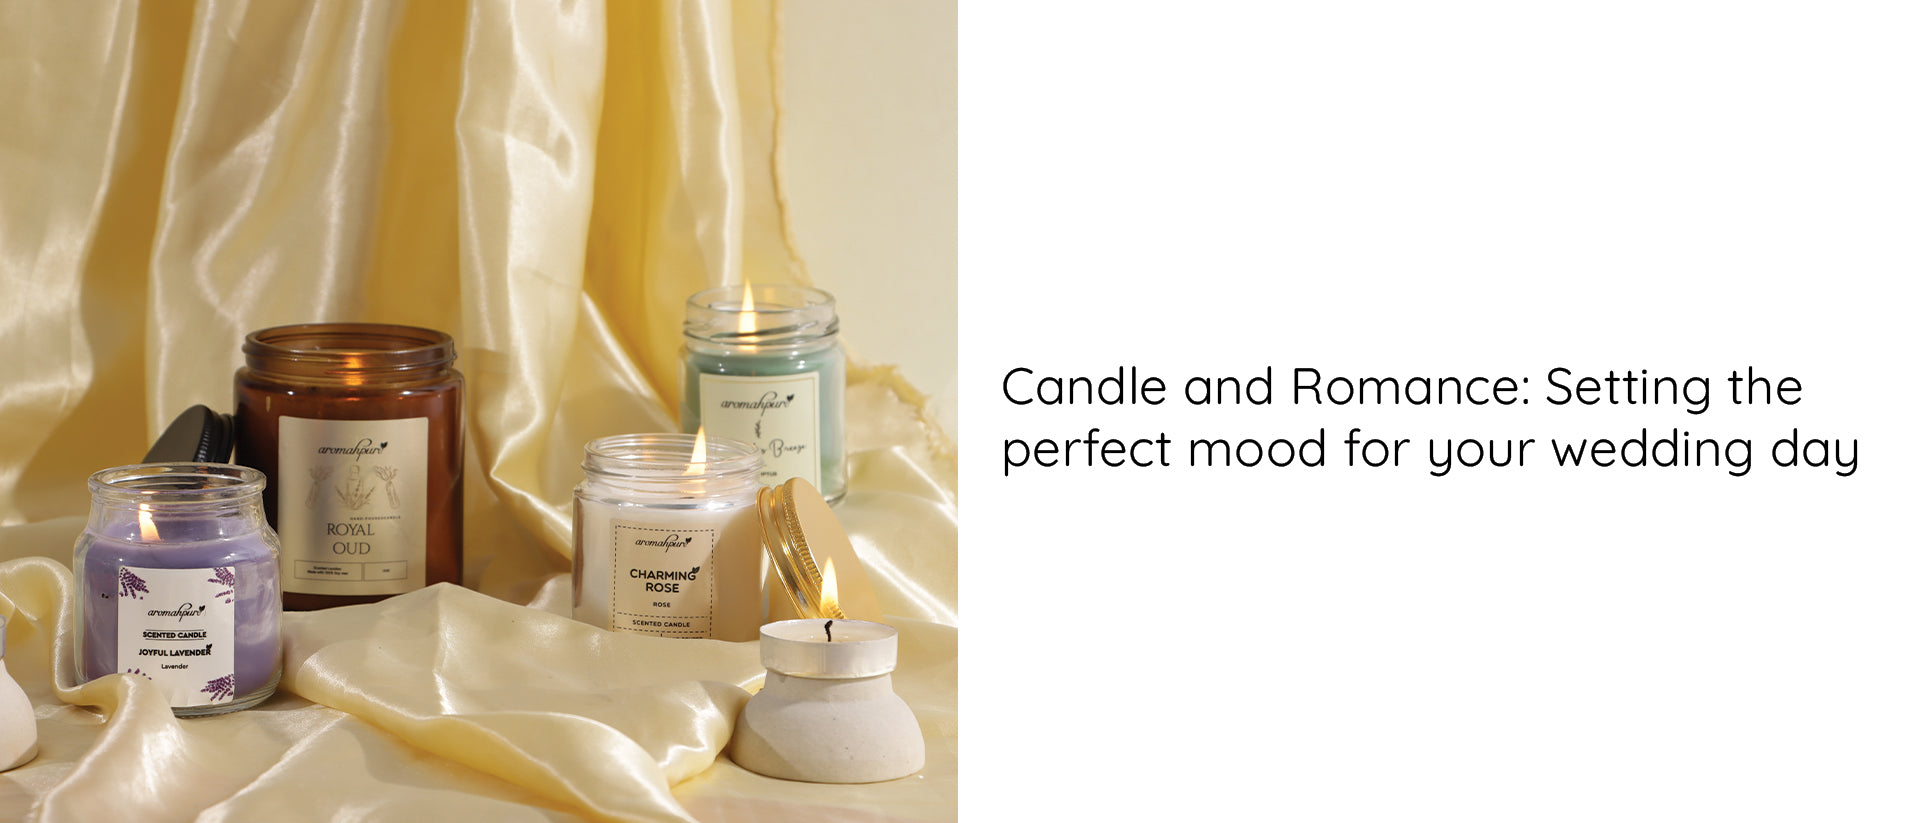 Candle and Romance: Setting the perfect mood for your wedding day